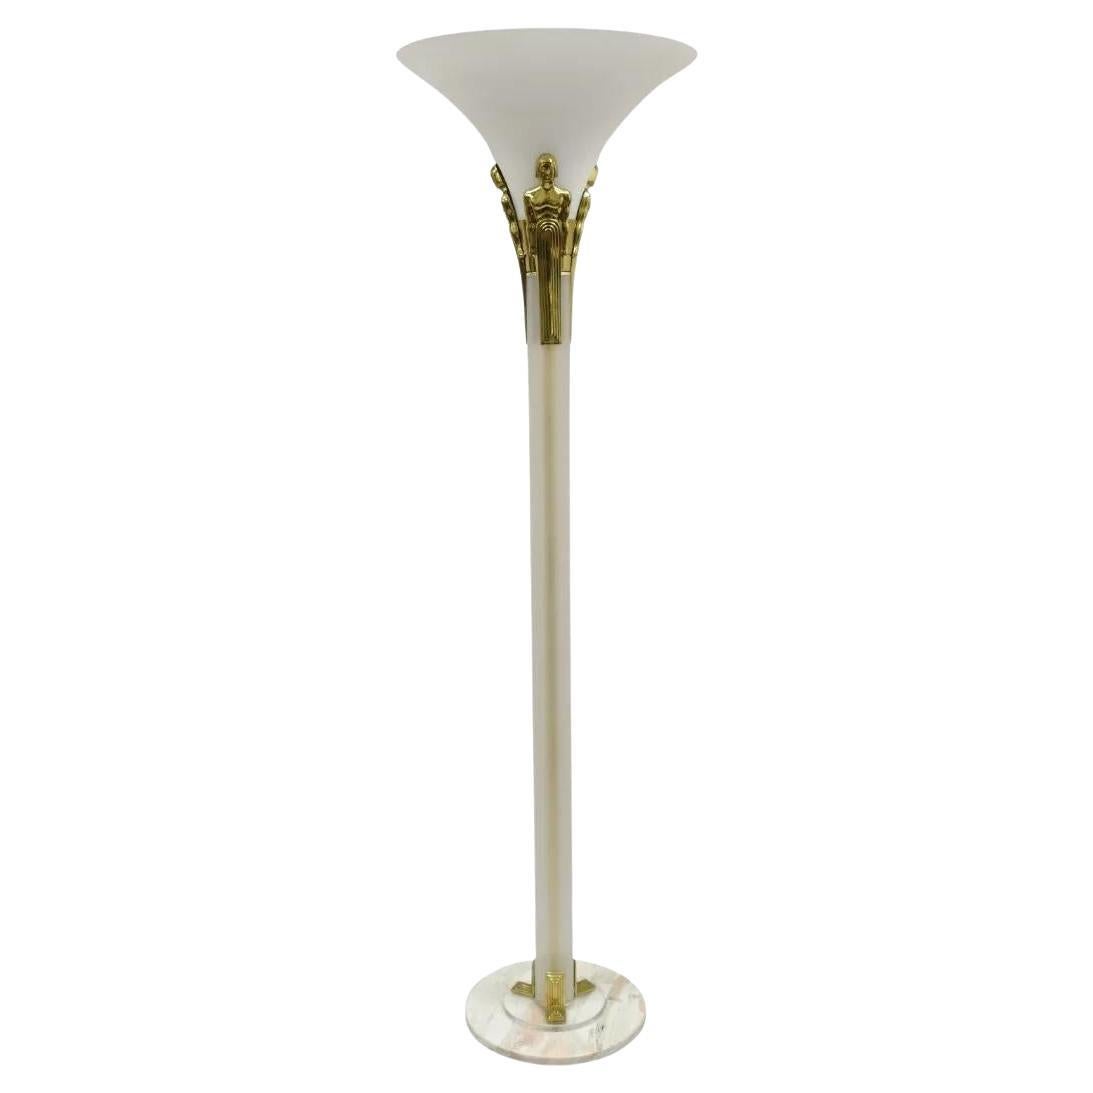 Vintage Art Deco Style Figural Frosted Acrylic and Glass Torchiere Floor Lamp